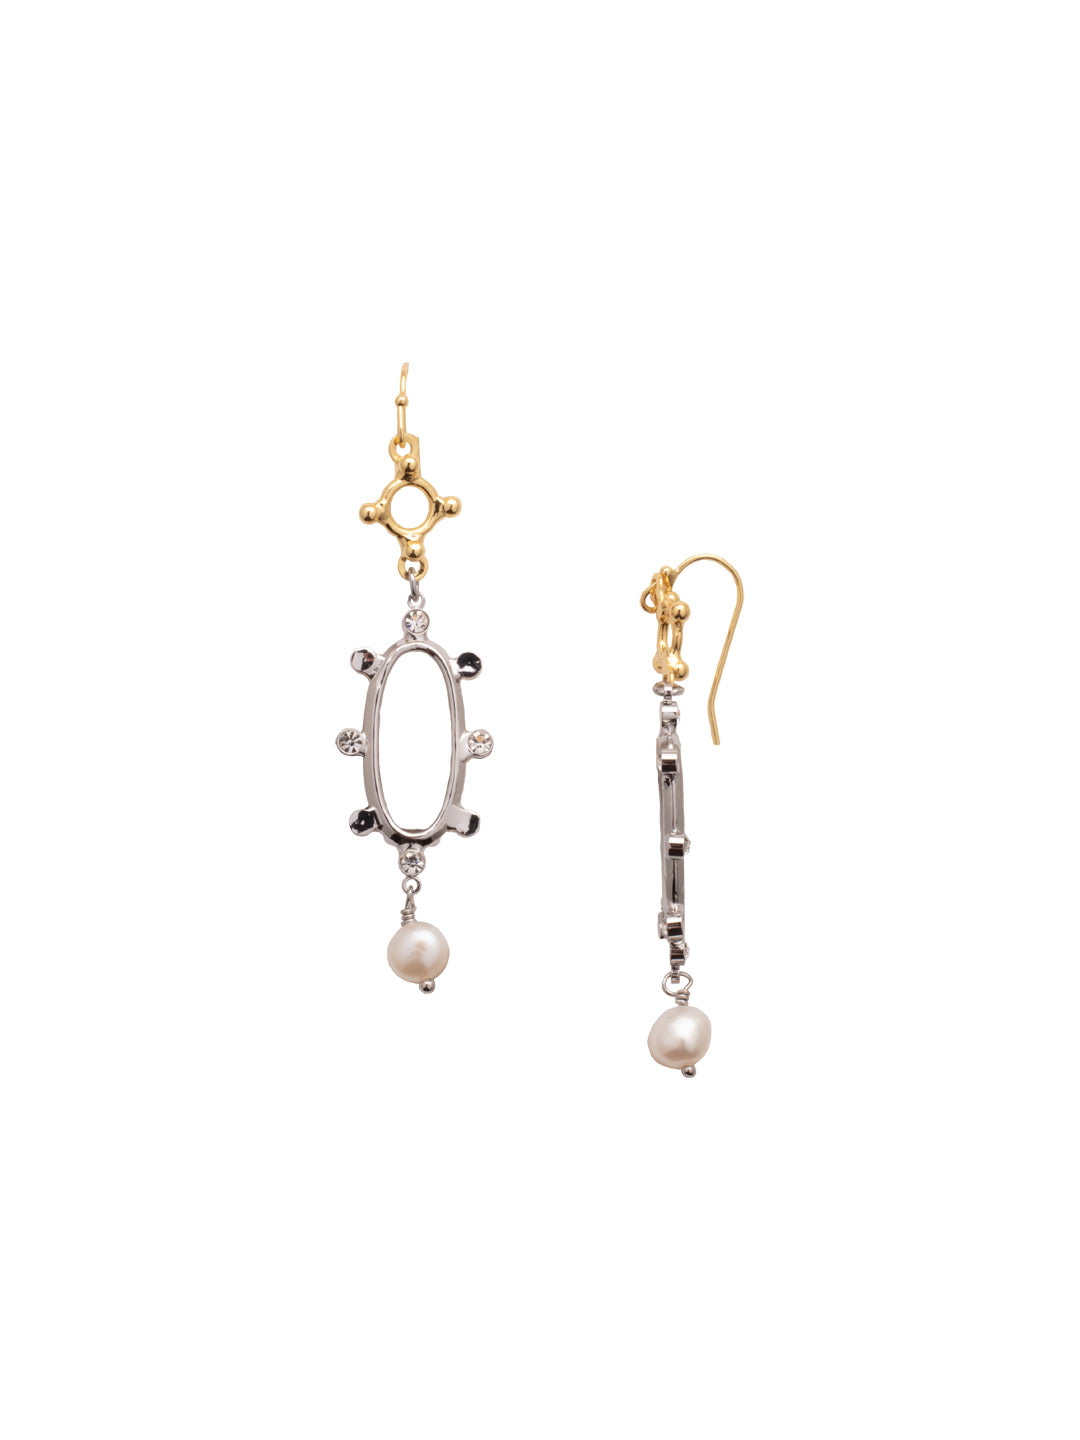 Serenity Long Earring - 4EFC60MXCRY - <p>The Serenity Long Earrings are made of mix metals and shapes linked together to create a fun and edgy look! From Sorrelli's Crystal collection in our Mixed Metal finish.</p>